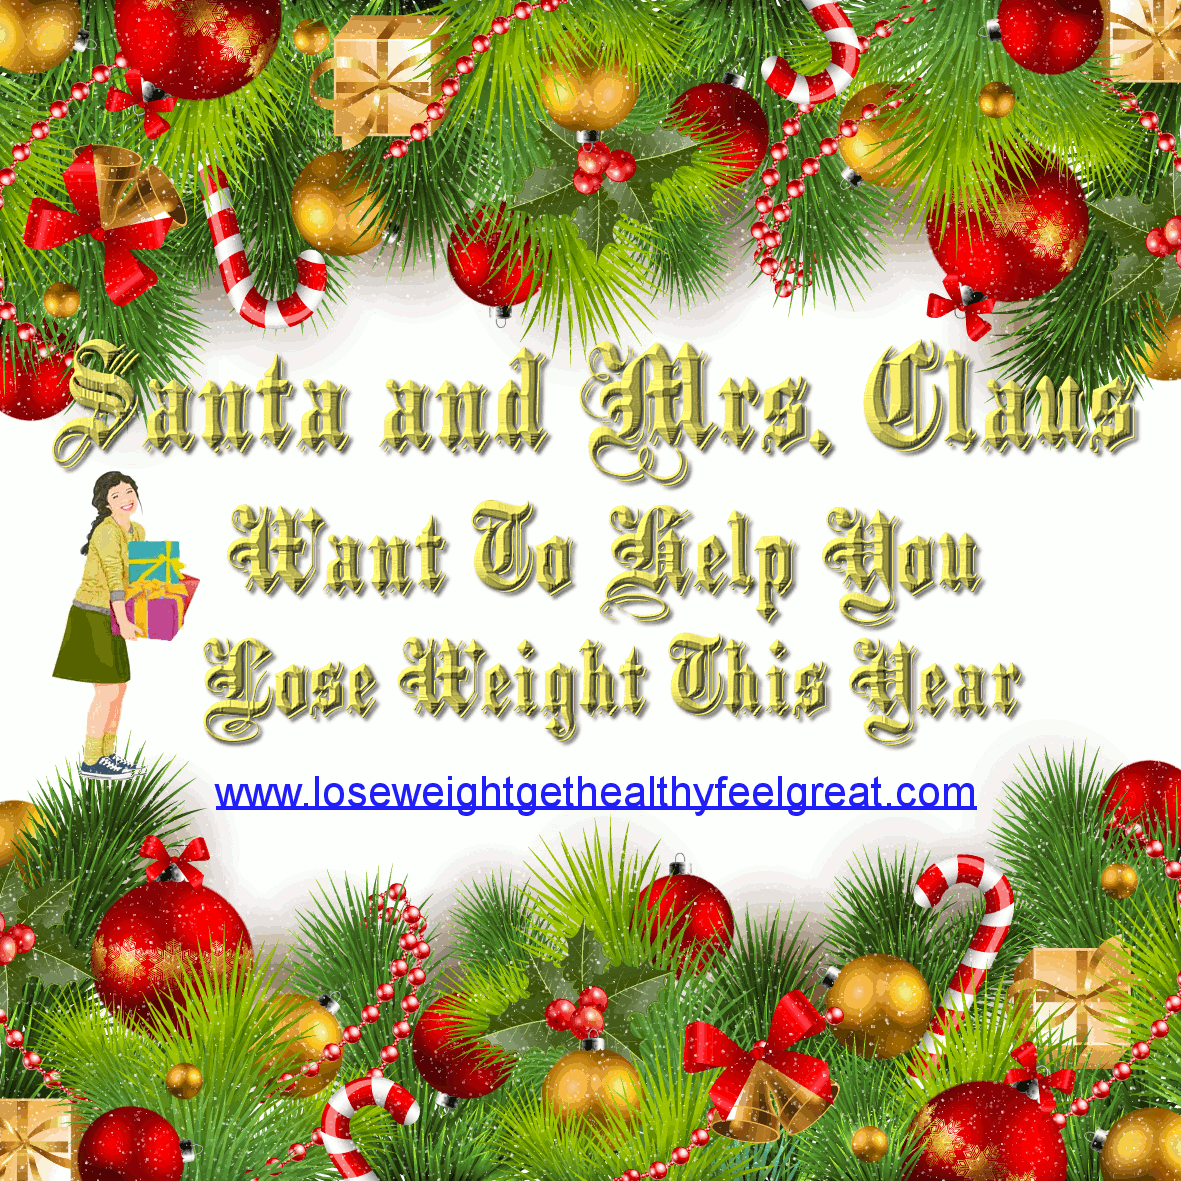 Lose weight this Christmas with the Skinny Fiber weight loss challenge